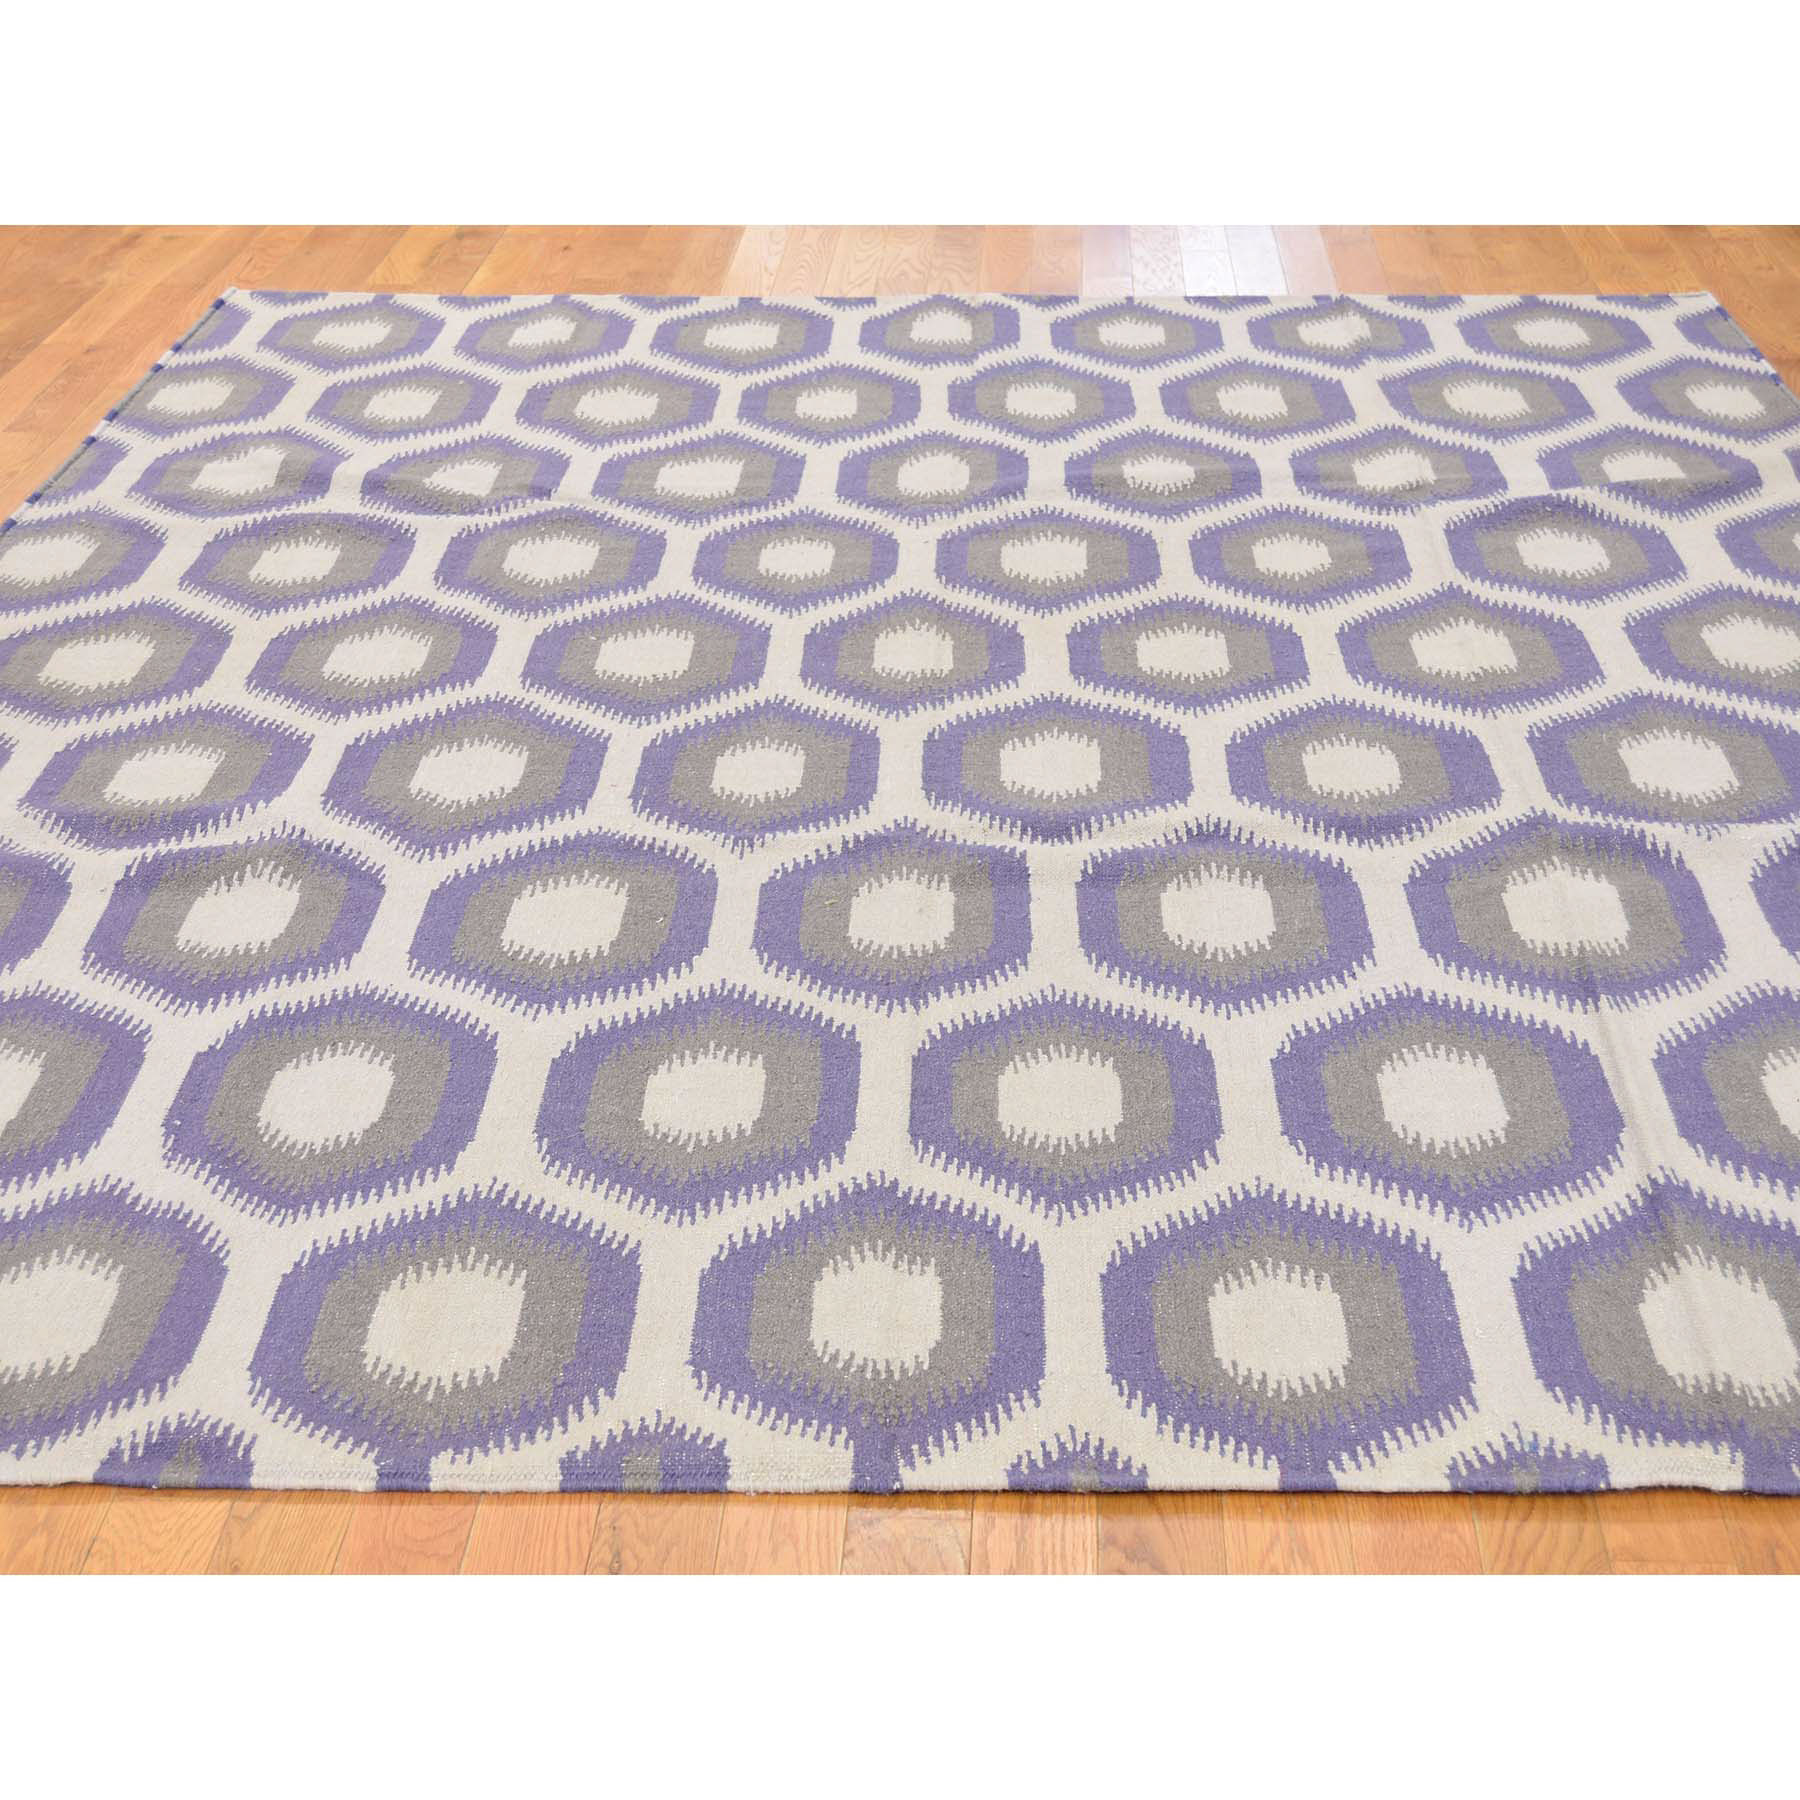 8-10--x12-2-- Durie Kilim Flat Weave Hand Woven Reversible Pure Wool Rug 